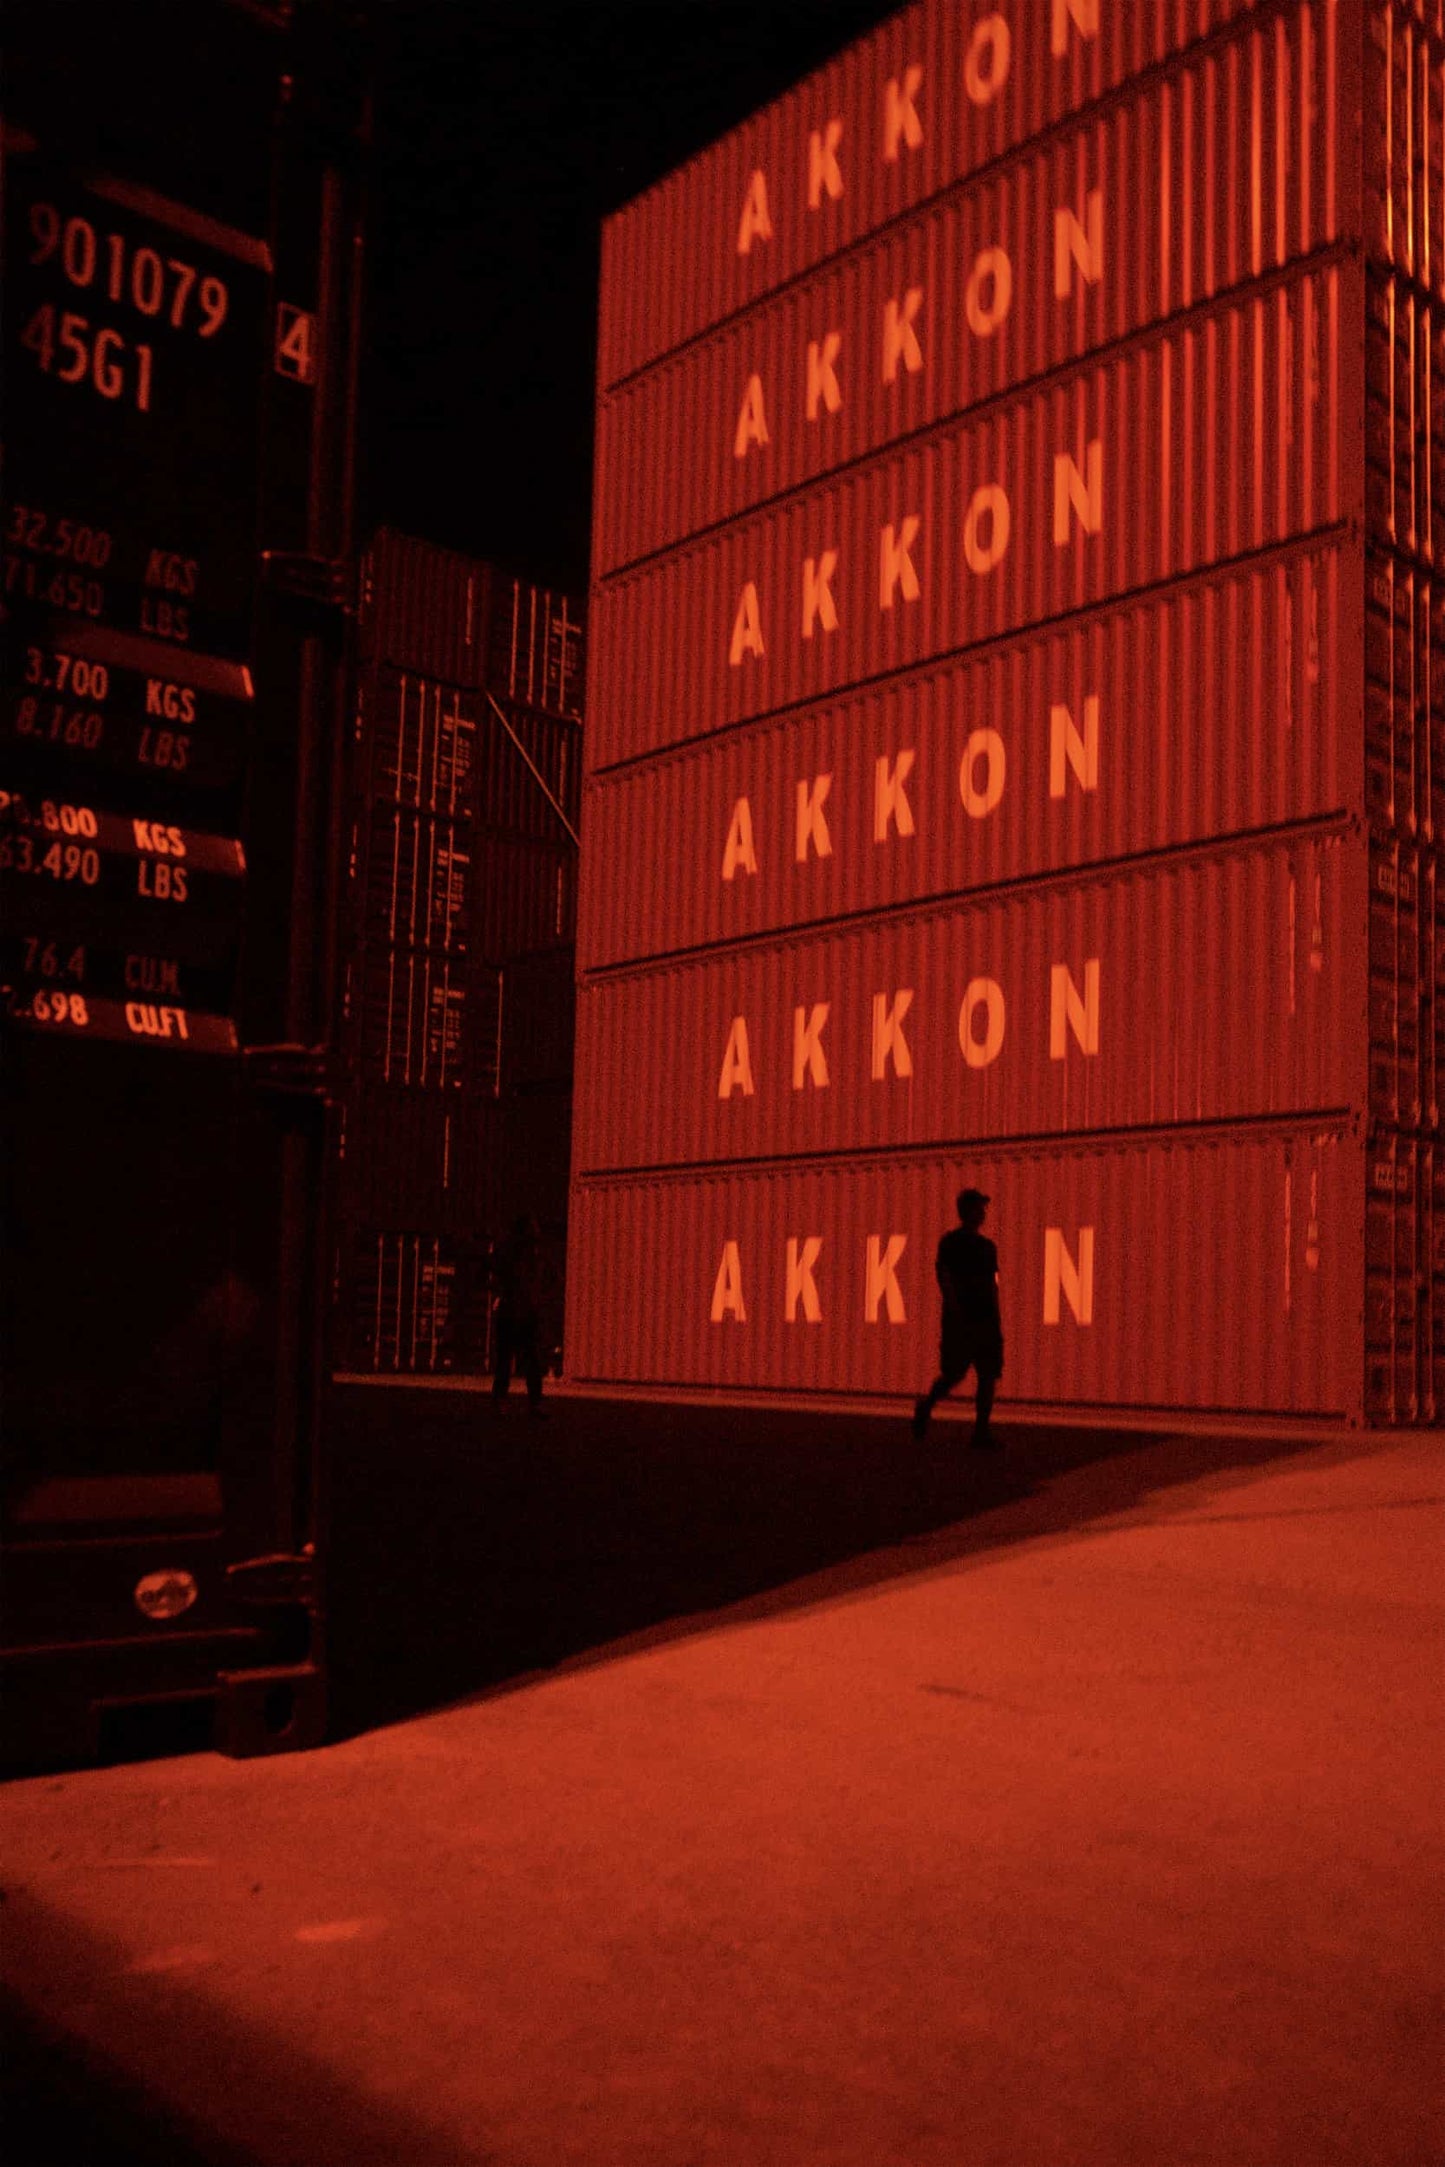 The artpiece 'Containers' by Michael Cai which shows a worker walking by a stack of red containers.